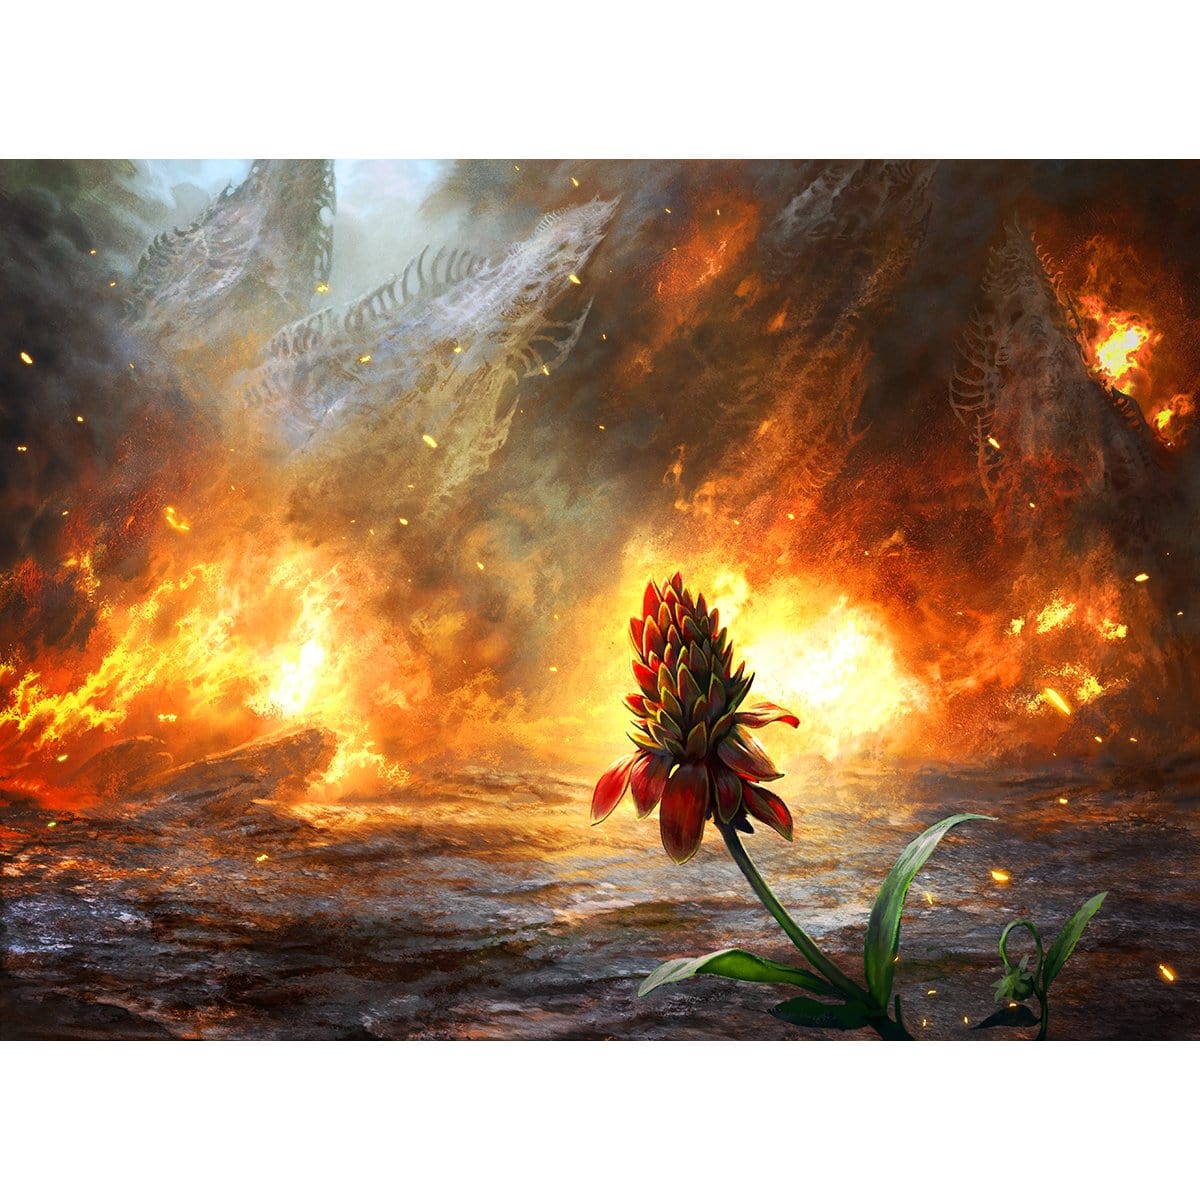 Cleansing Wildfire Print